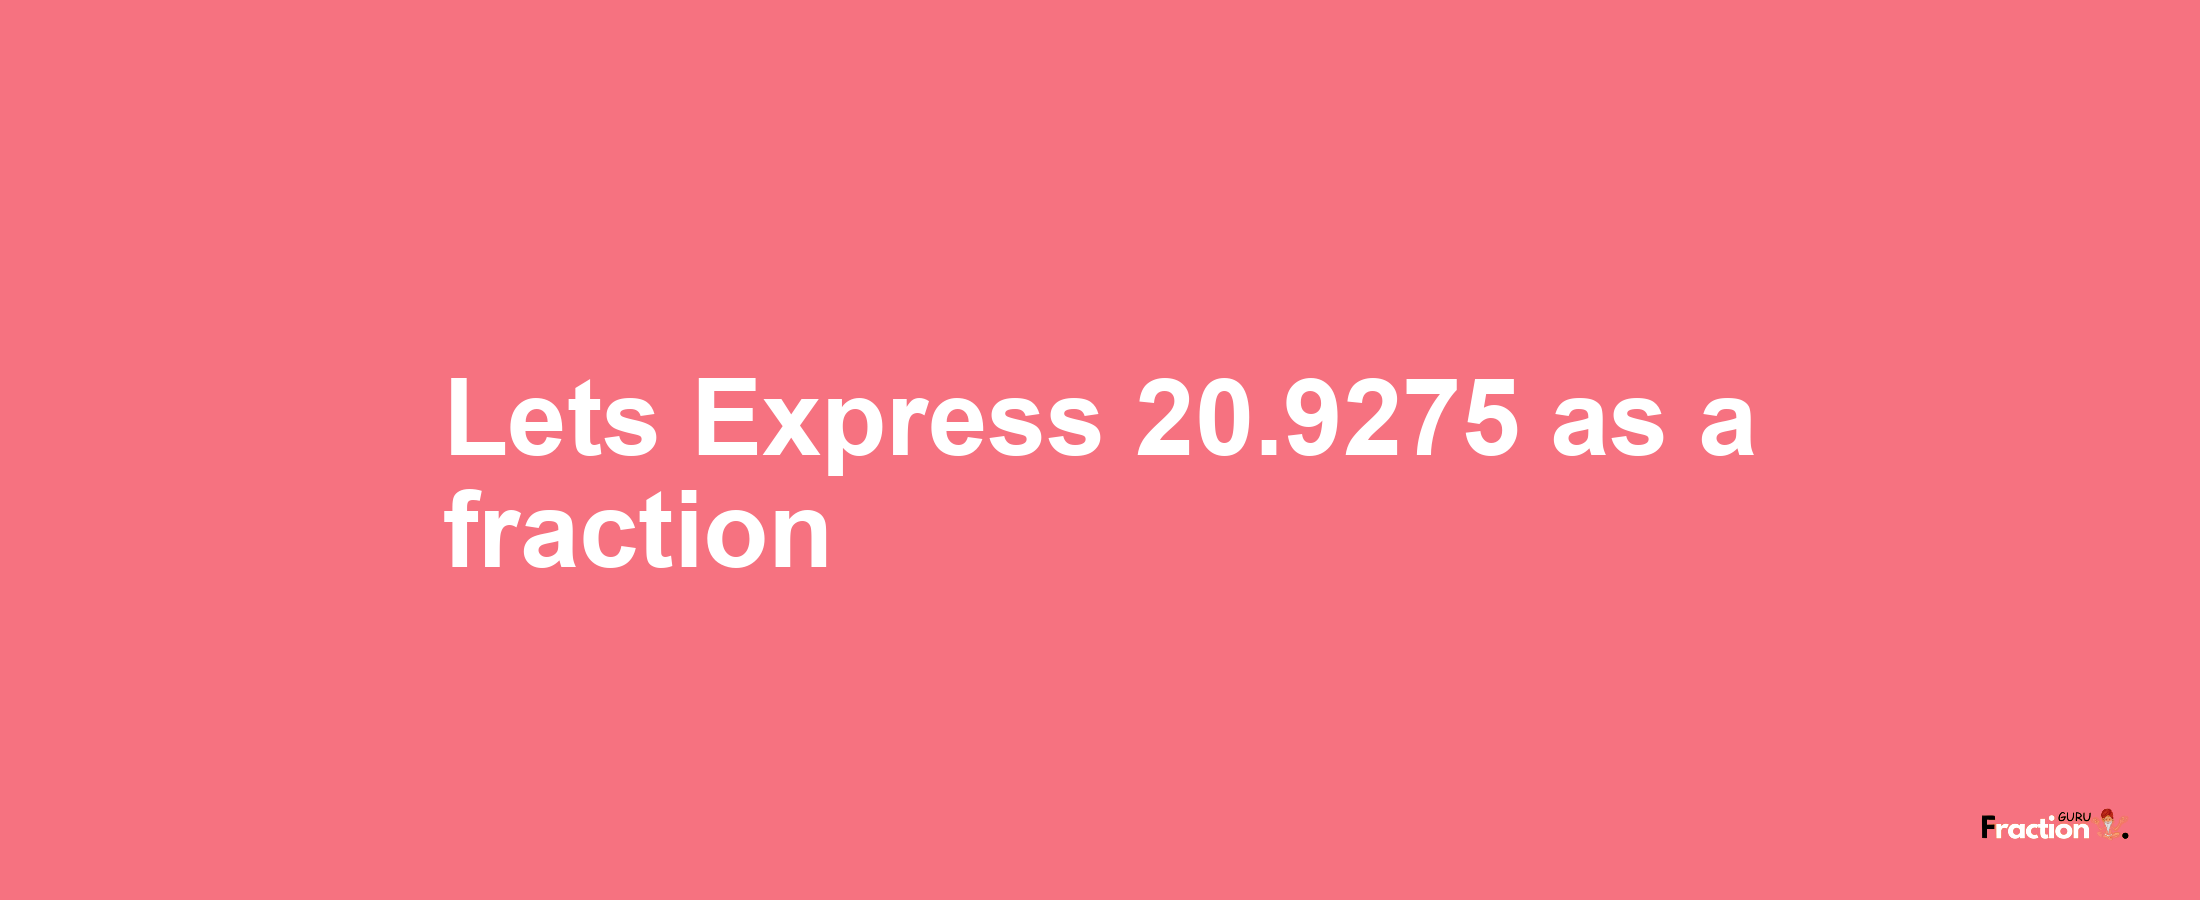 Lets Express 20.9275 as afraction